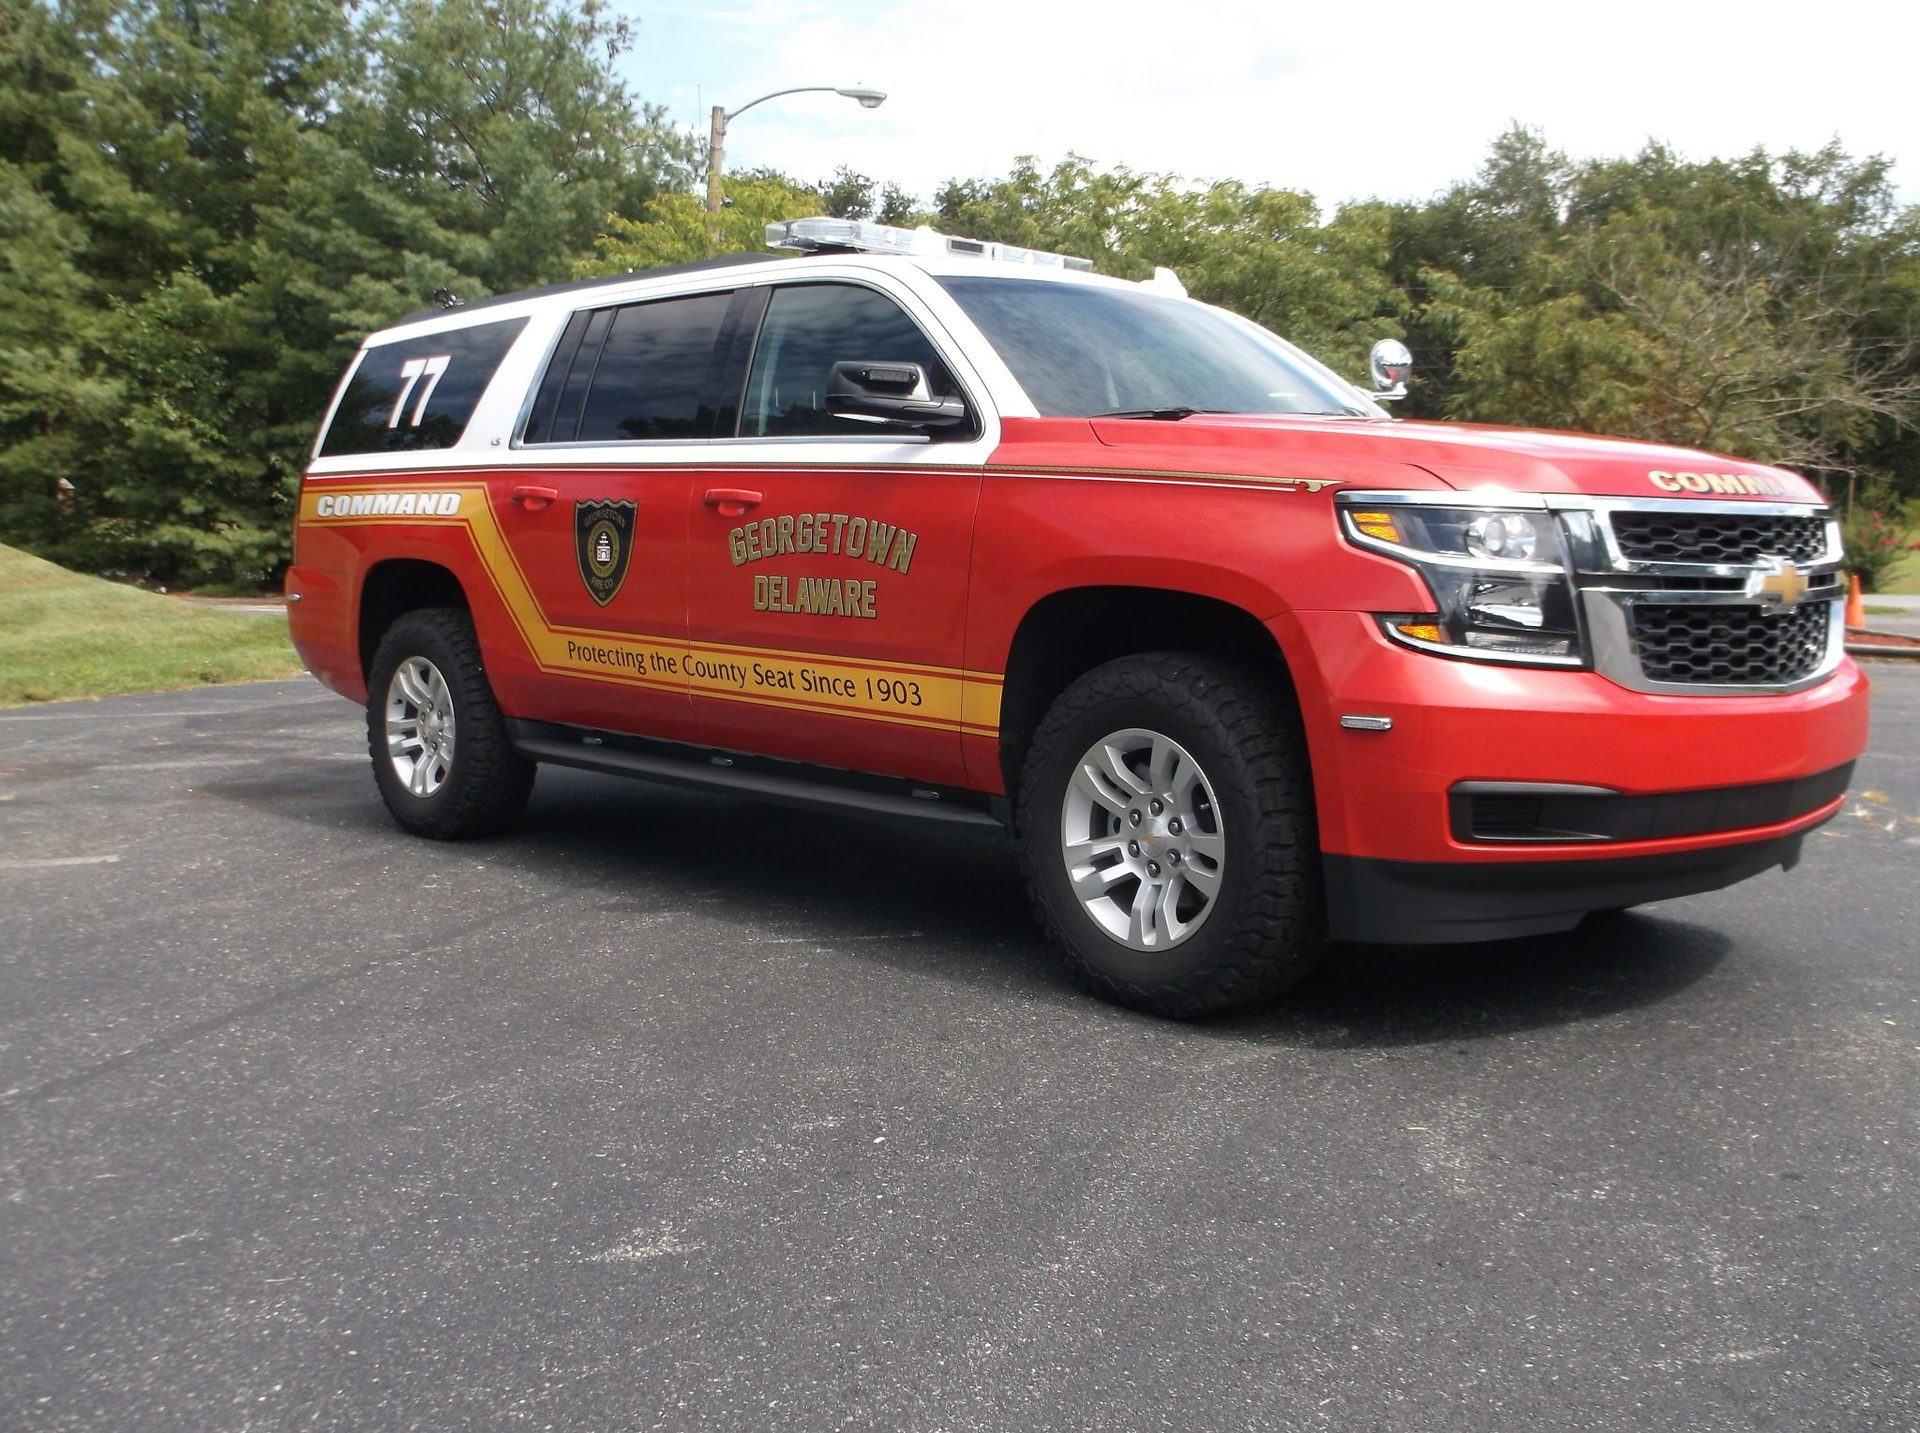 Featured image for “Georgetown VFC Command Unit”